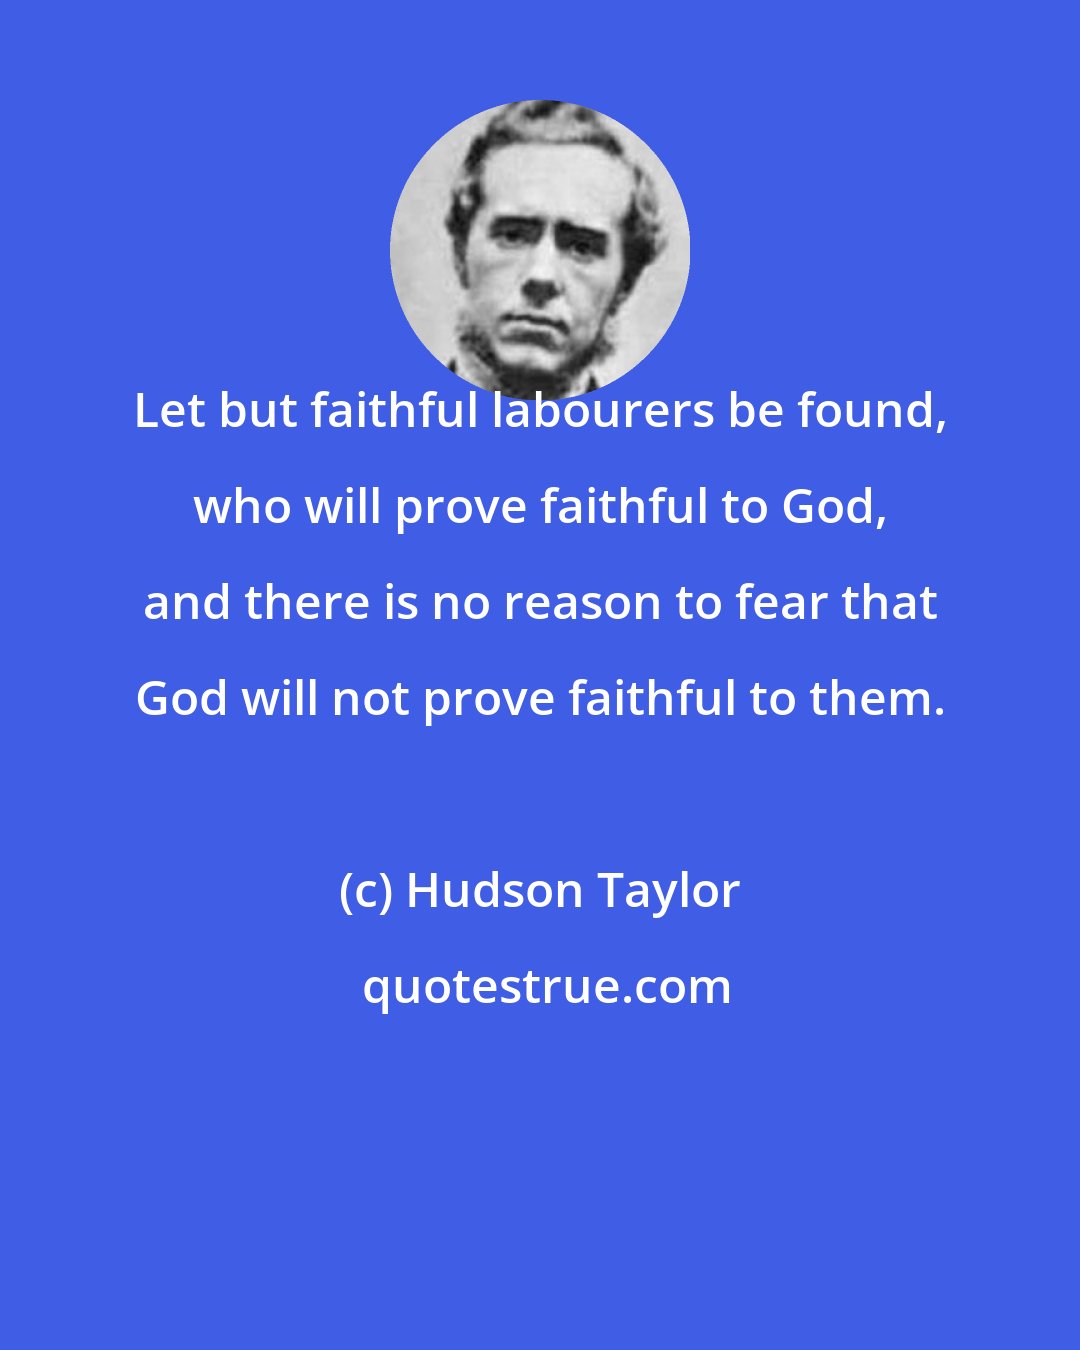 Hudson Taylor: Let but faithful labourers be found, who will prove faithful to God, and there is no reason to fear that God will not prove faithful to them.